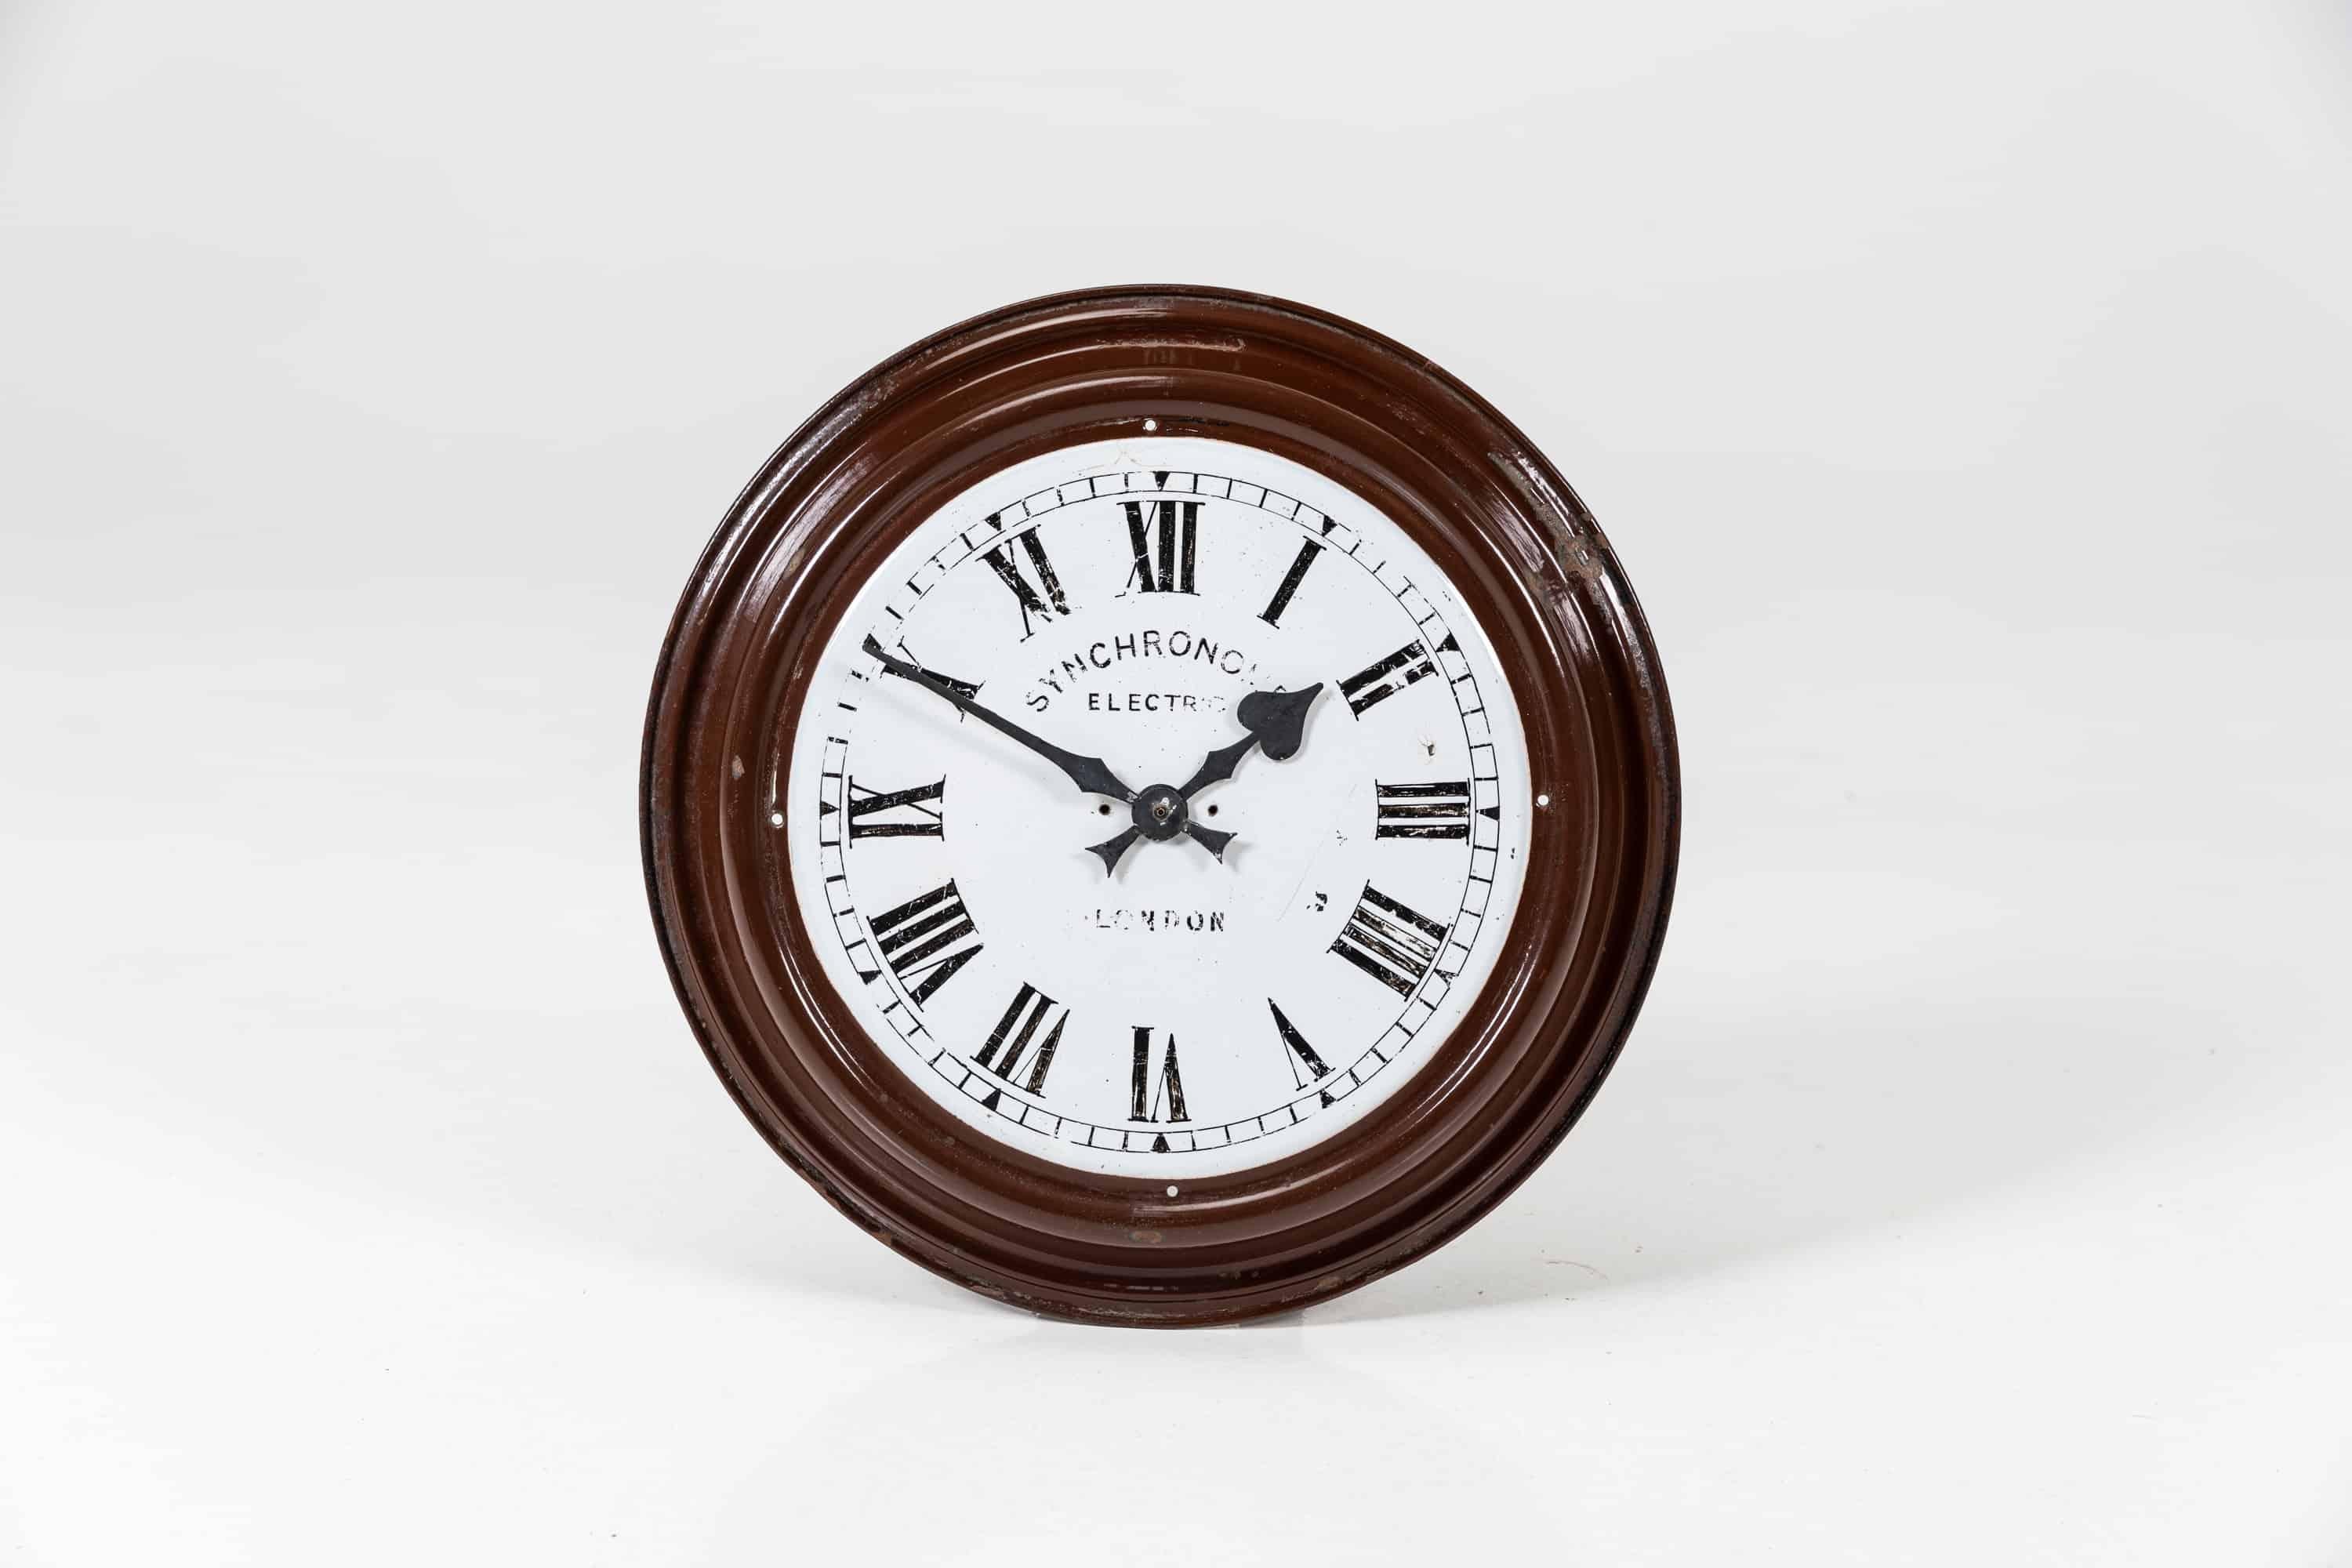 A simply formed one piece enamel wall clock made by Synchronome. c.1930

Formerly slave clocks made from a single piece of enamelled steel featuring roman numerals. Glass and external bezel missing. The spaded hands now running on a high torque